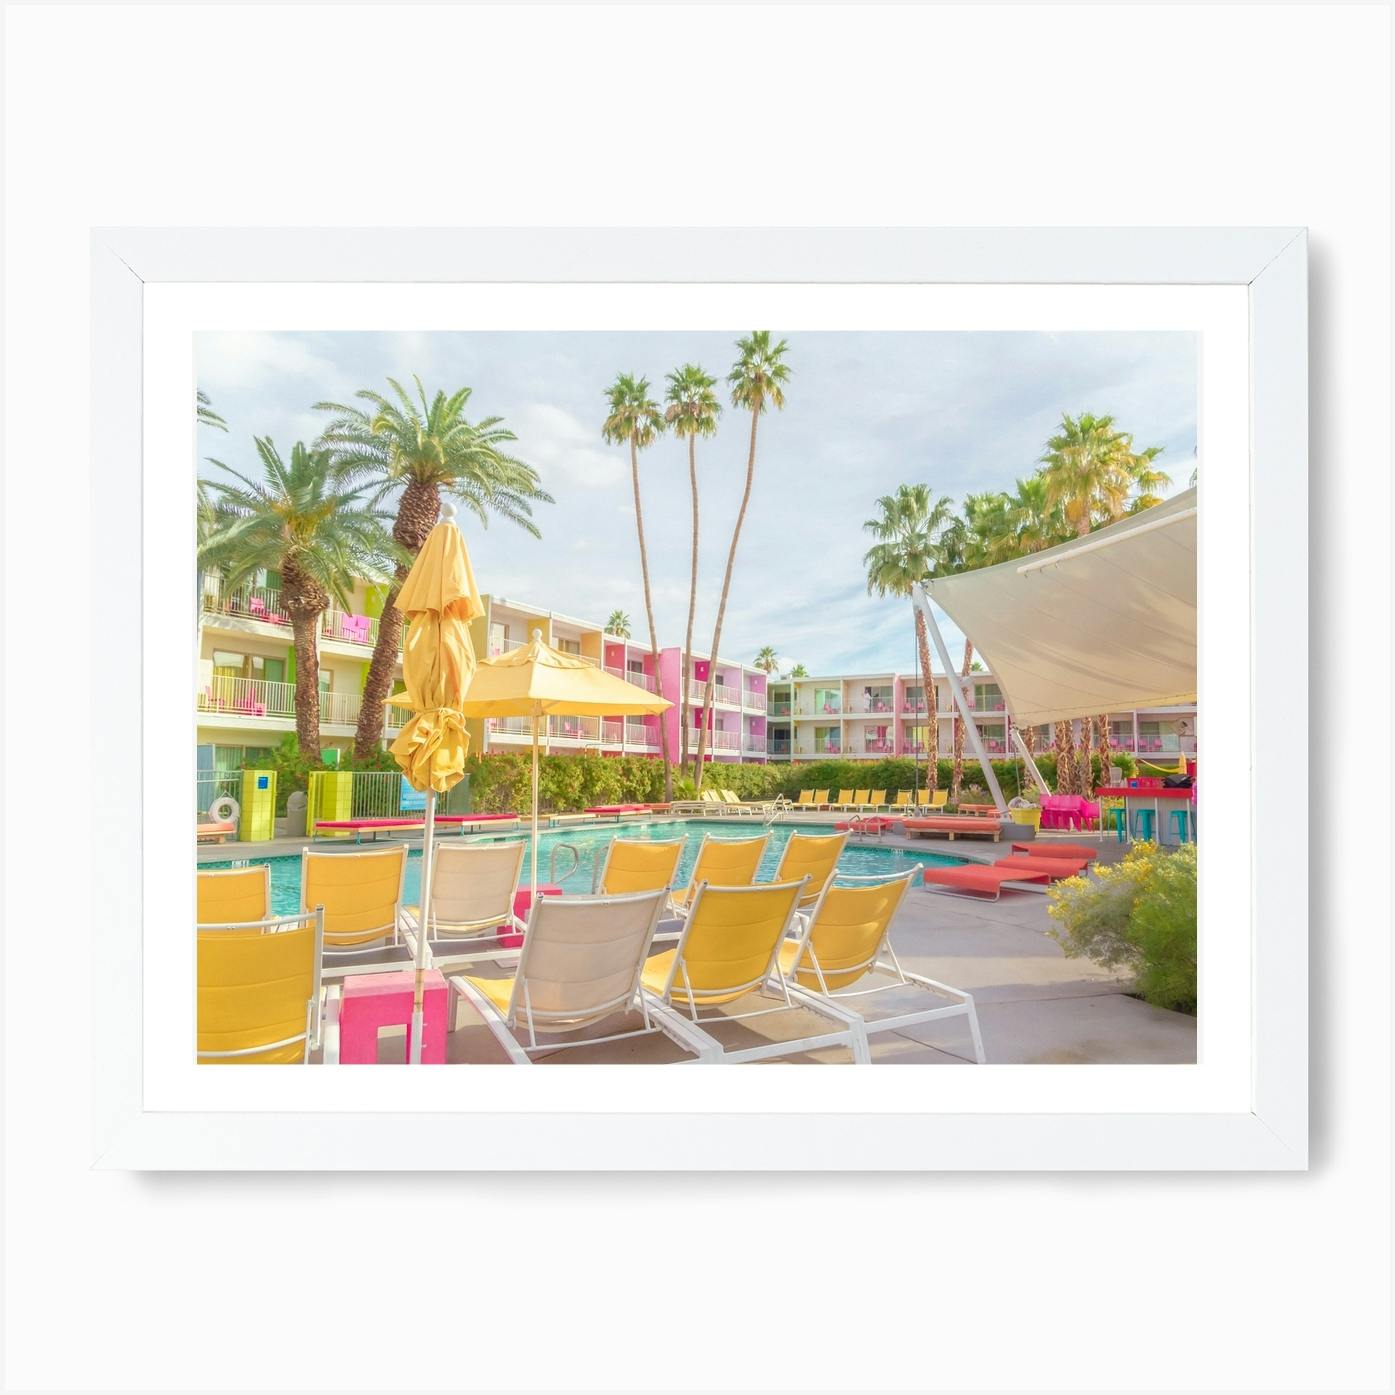 PALM SPRINGS Saguaro Hotel Picture Poster Print Sizes A5 to A0 **FREE DELIVERY